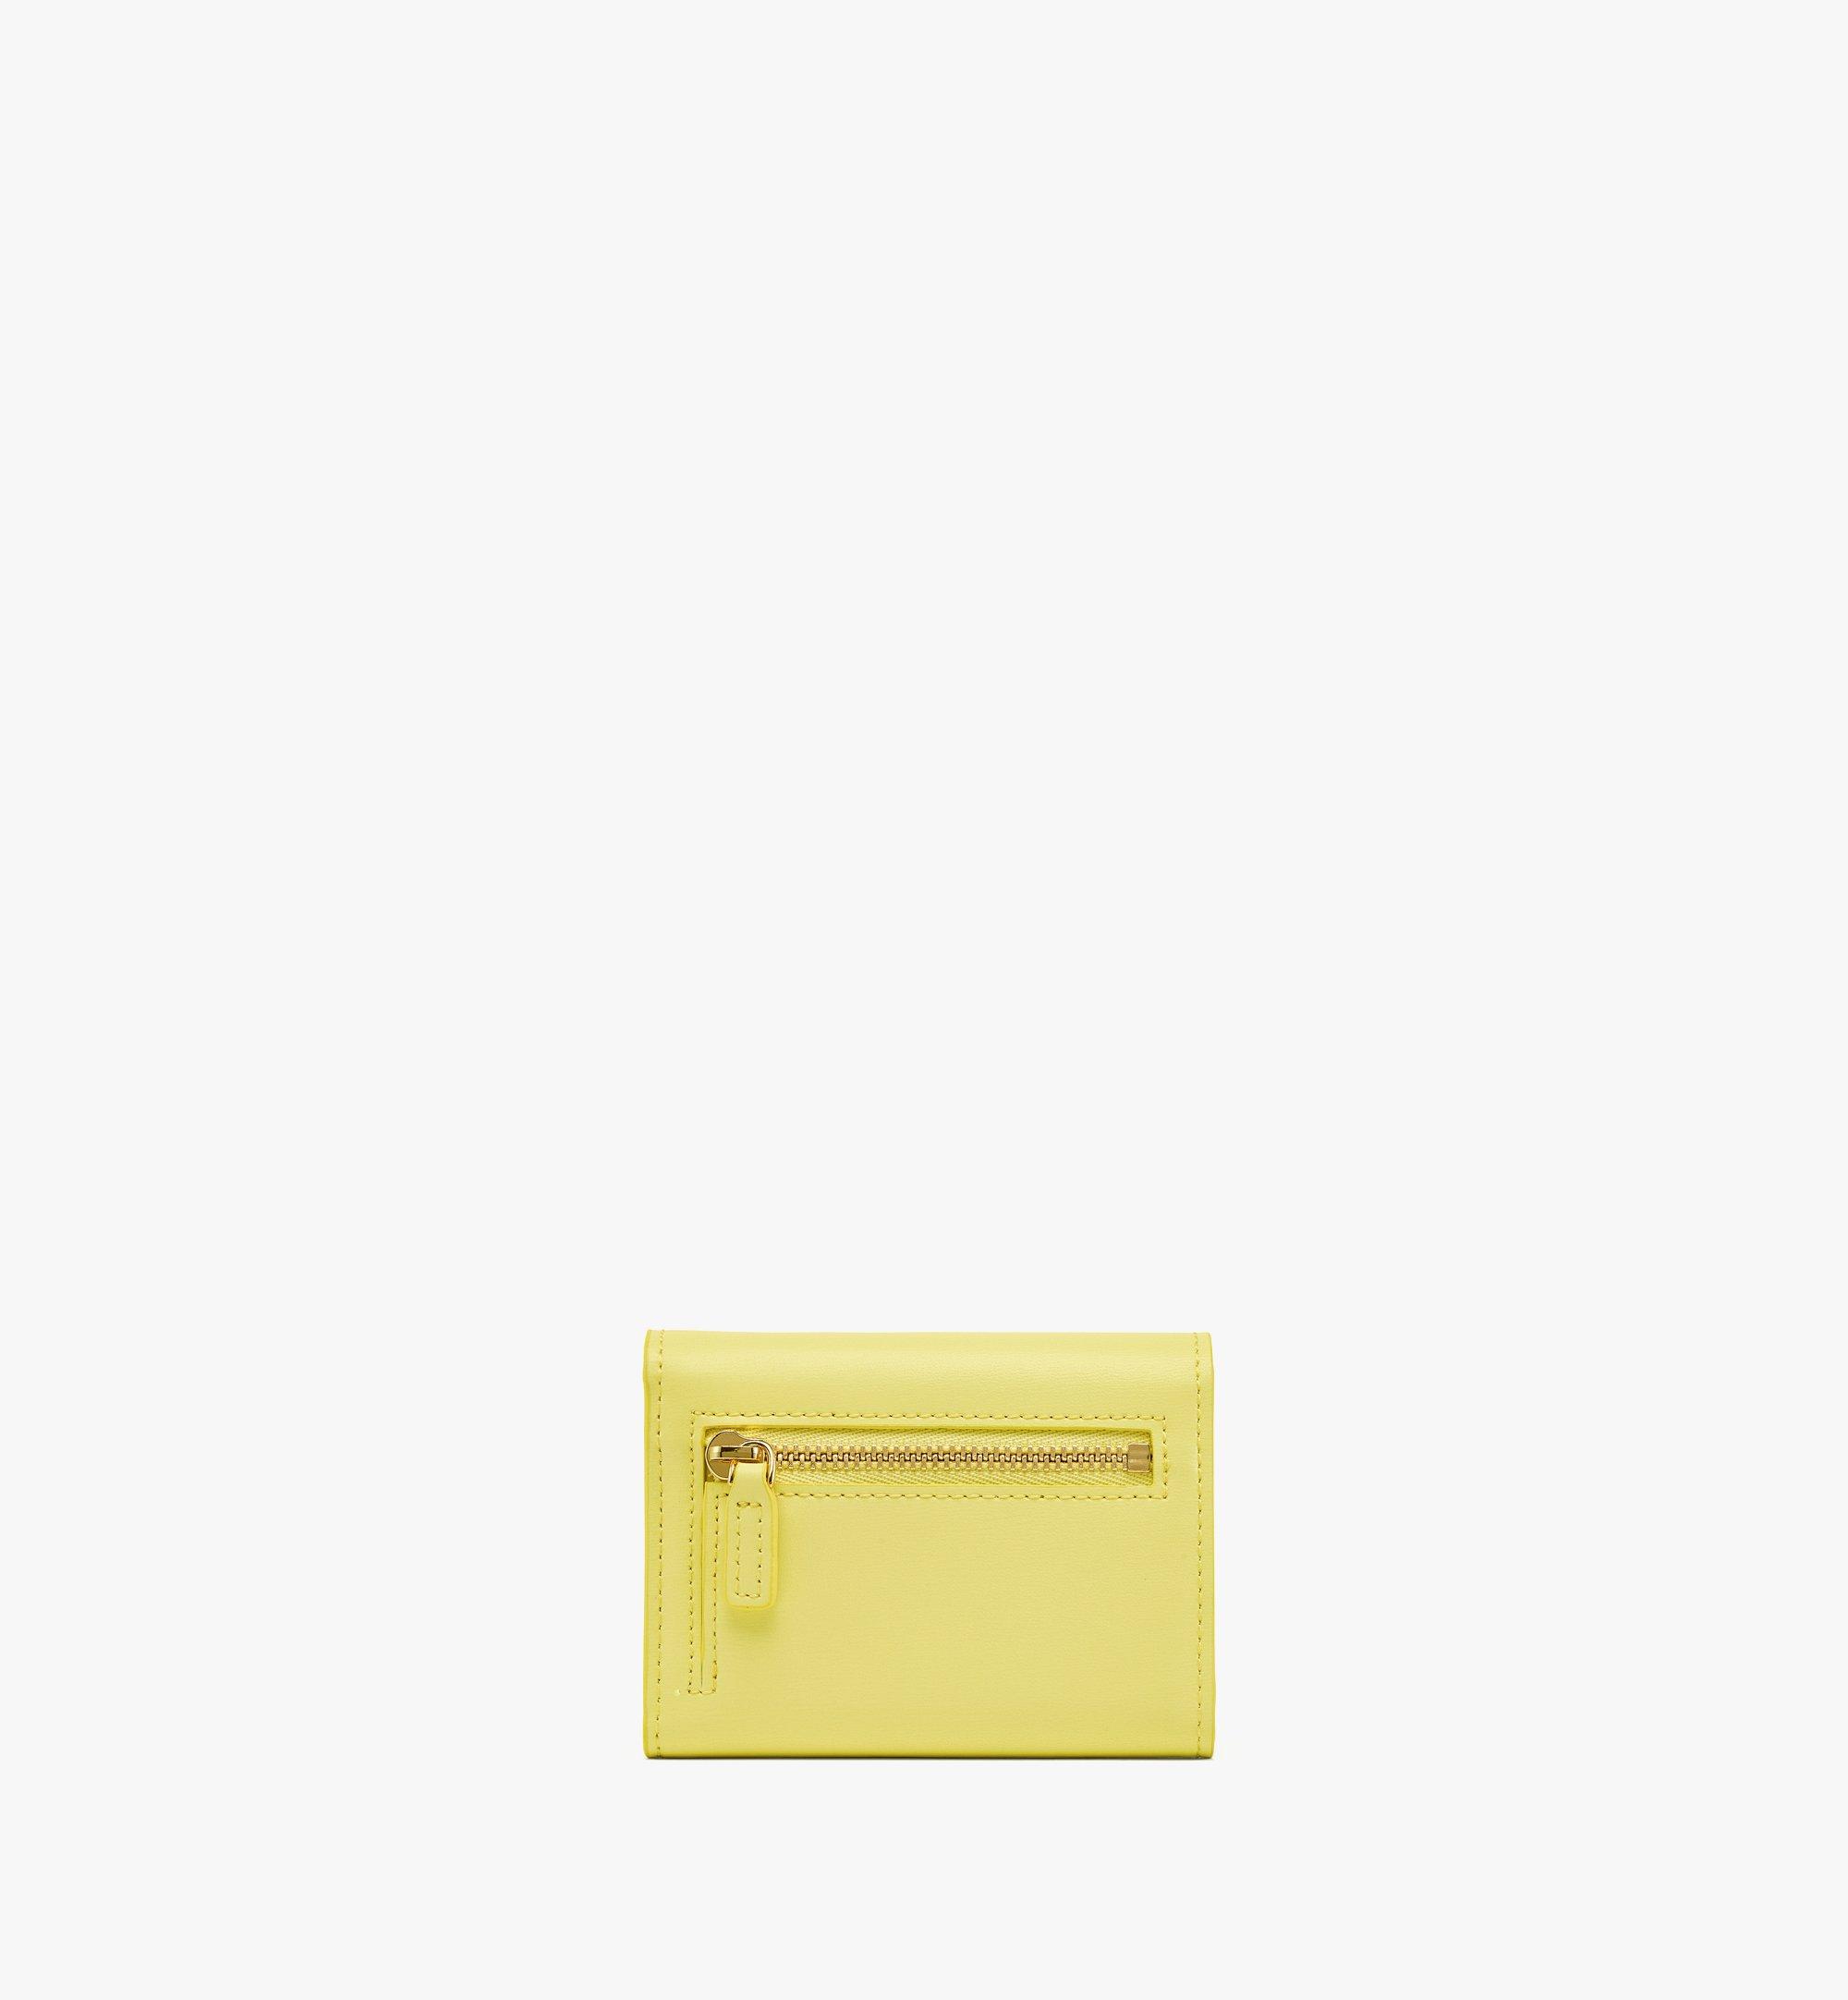 MCM Tracy Trifold Wallet in Spanish Leather Yellow MYSBAPA01Y4001 Alternate View 2